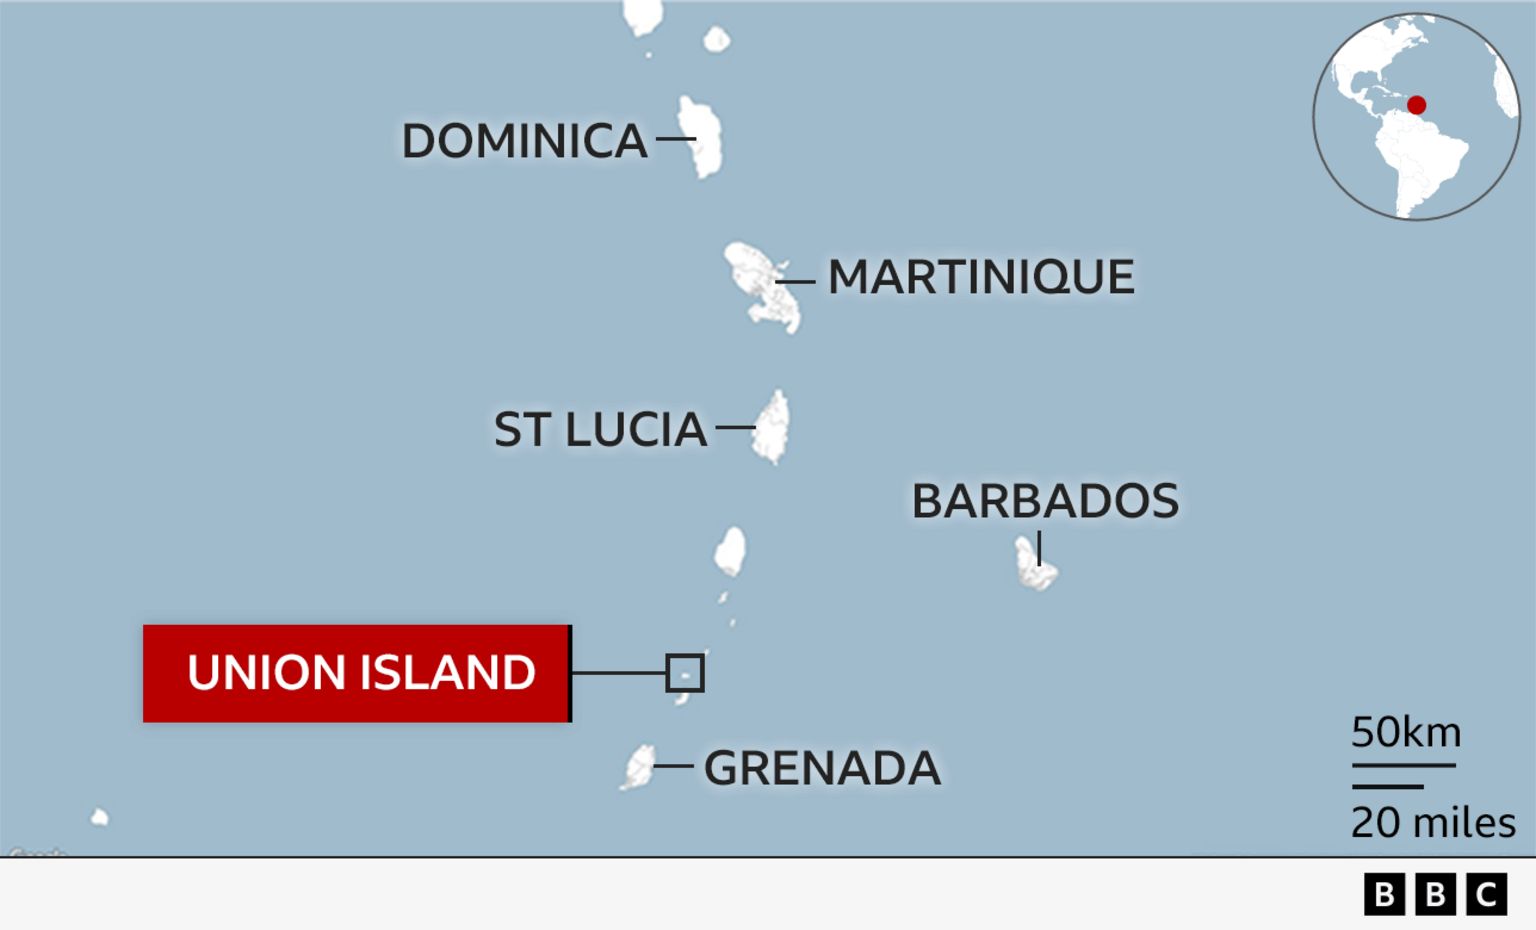 Map of the Caribbean showing Union Island and the surrounding islands